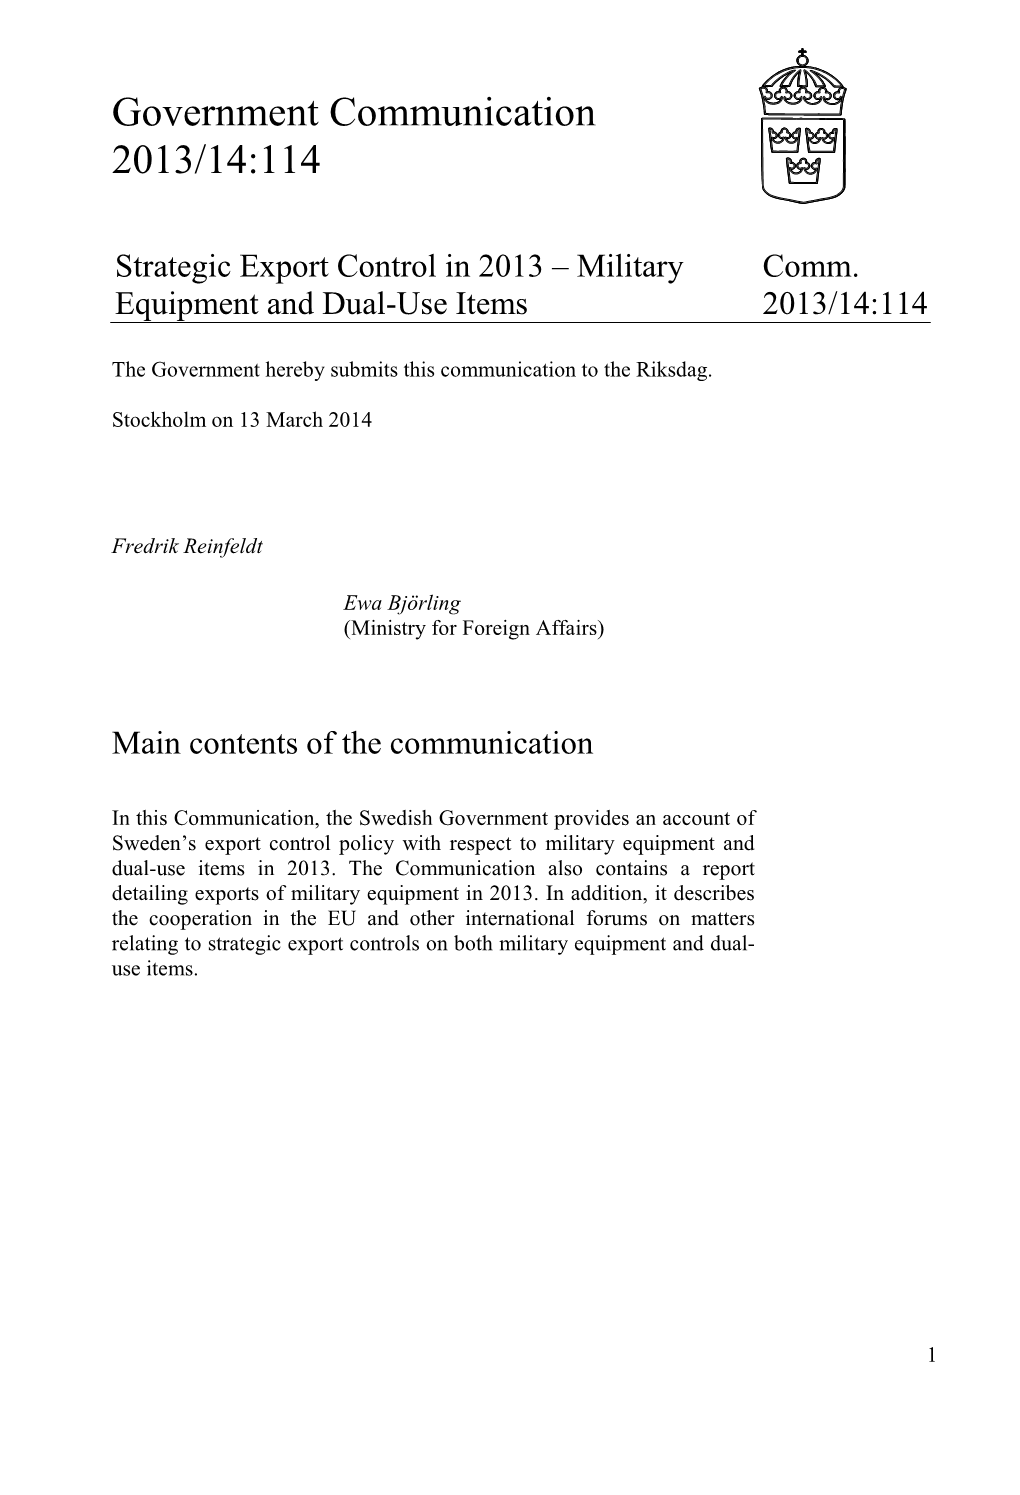 Military Equipment and Dual-Use Items Comm. 2013/14:114